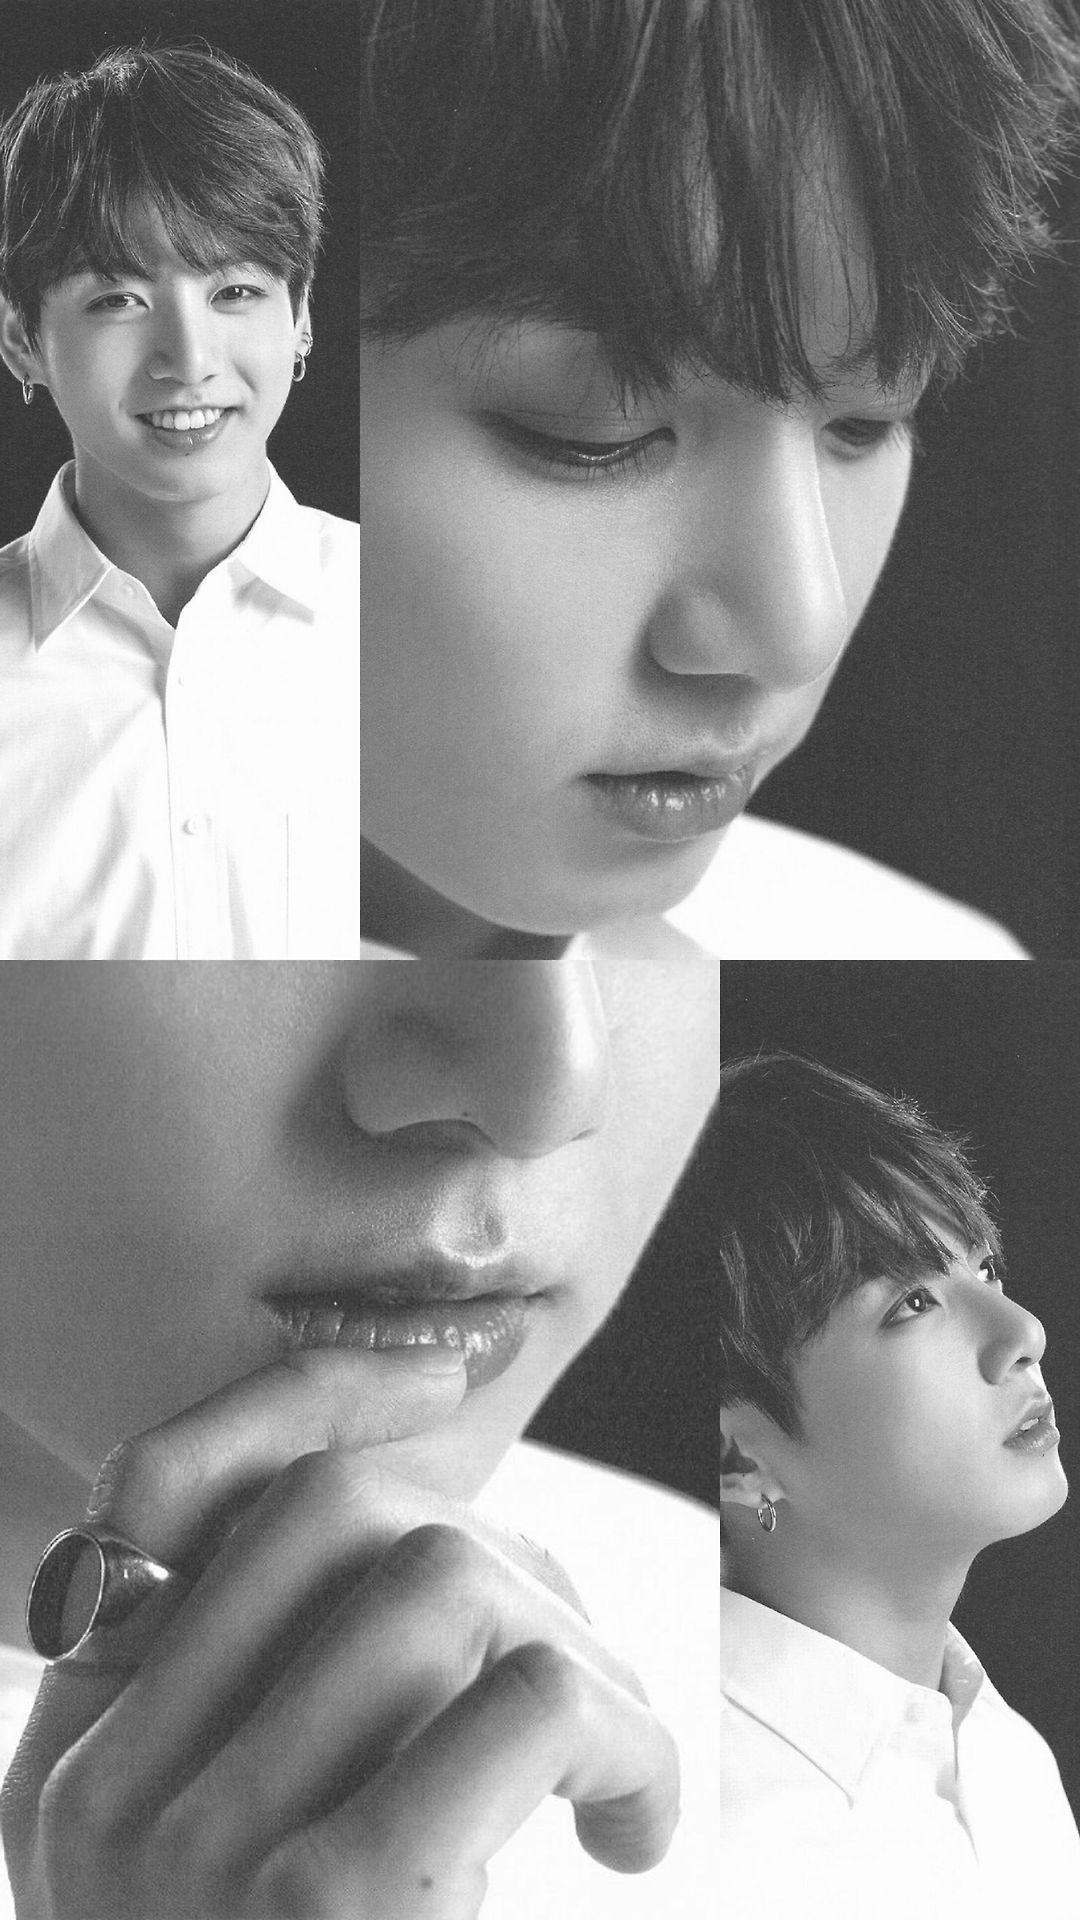 Black And White Aesthetic Jungkook Wallpapers - Wallpaper Cave